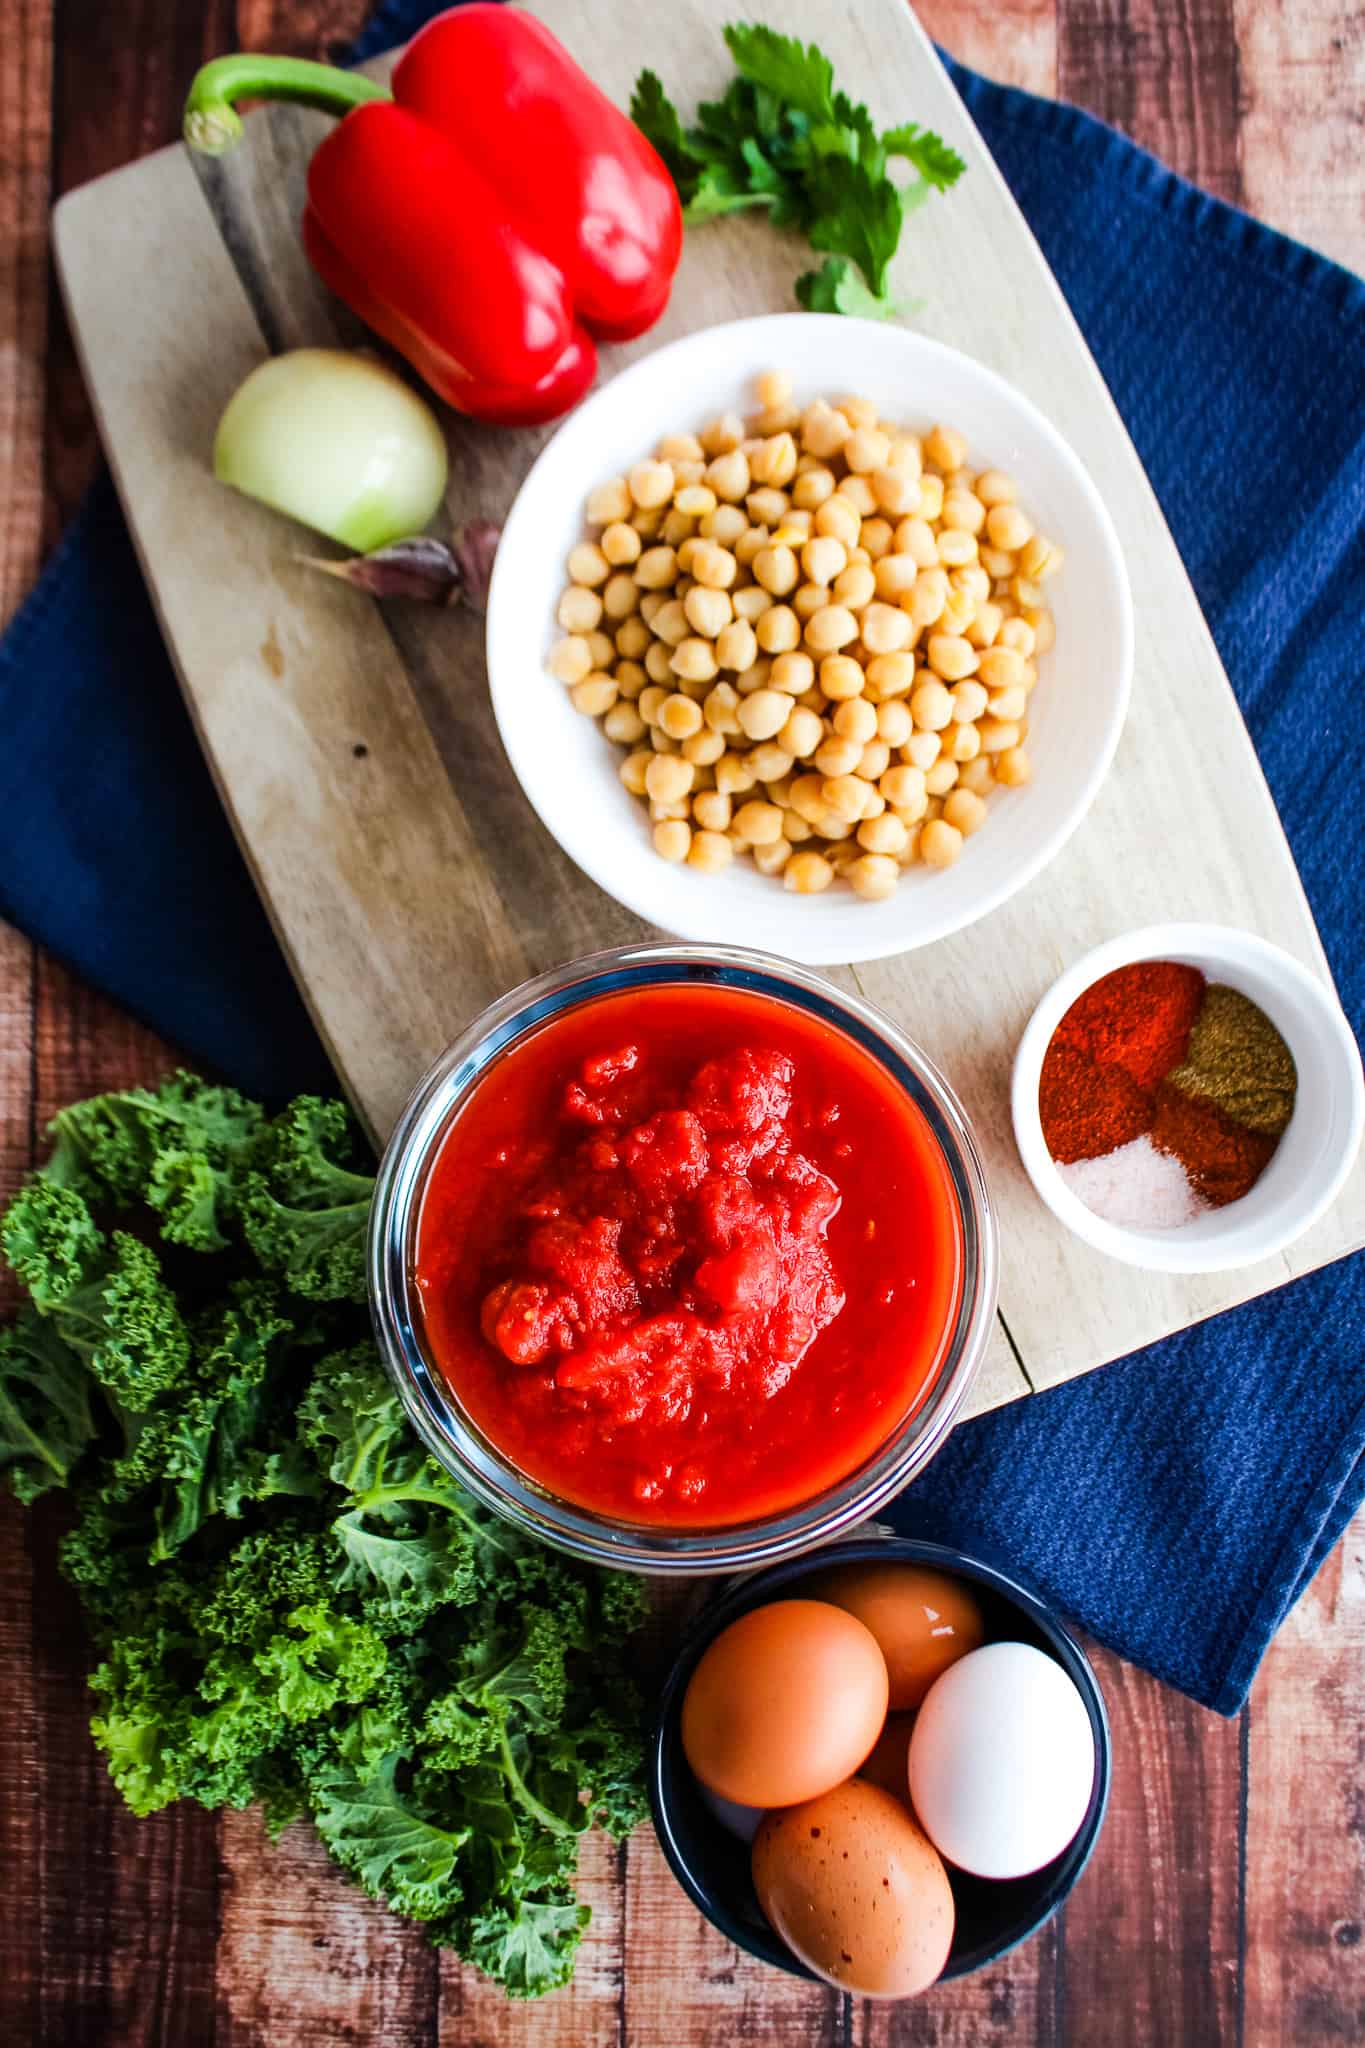 Ingredients displayed: bell pepper, white onion, chickpeas, canned tomatoes, spices, kale, eggs. 